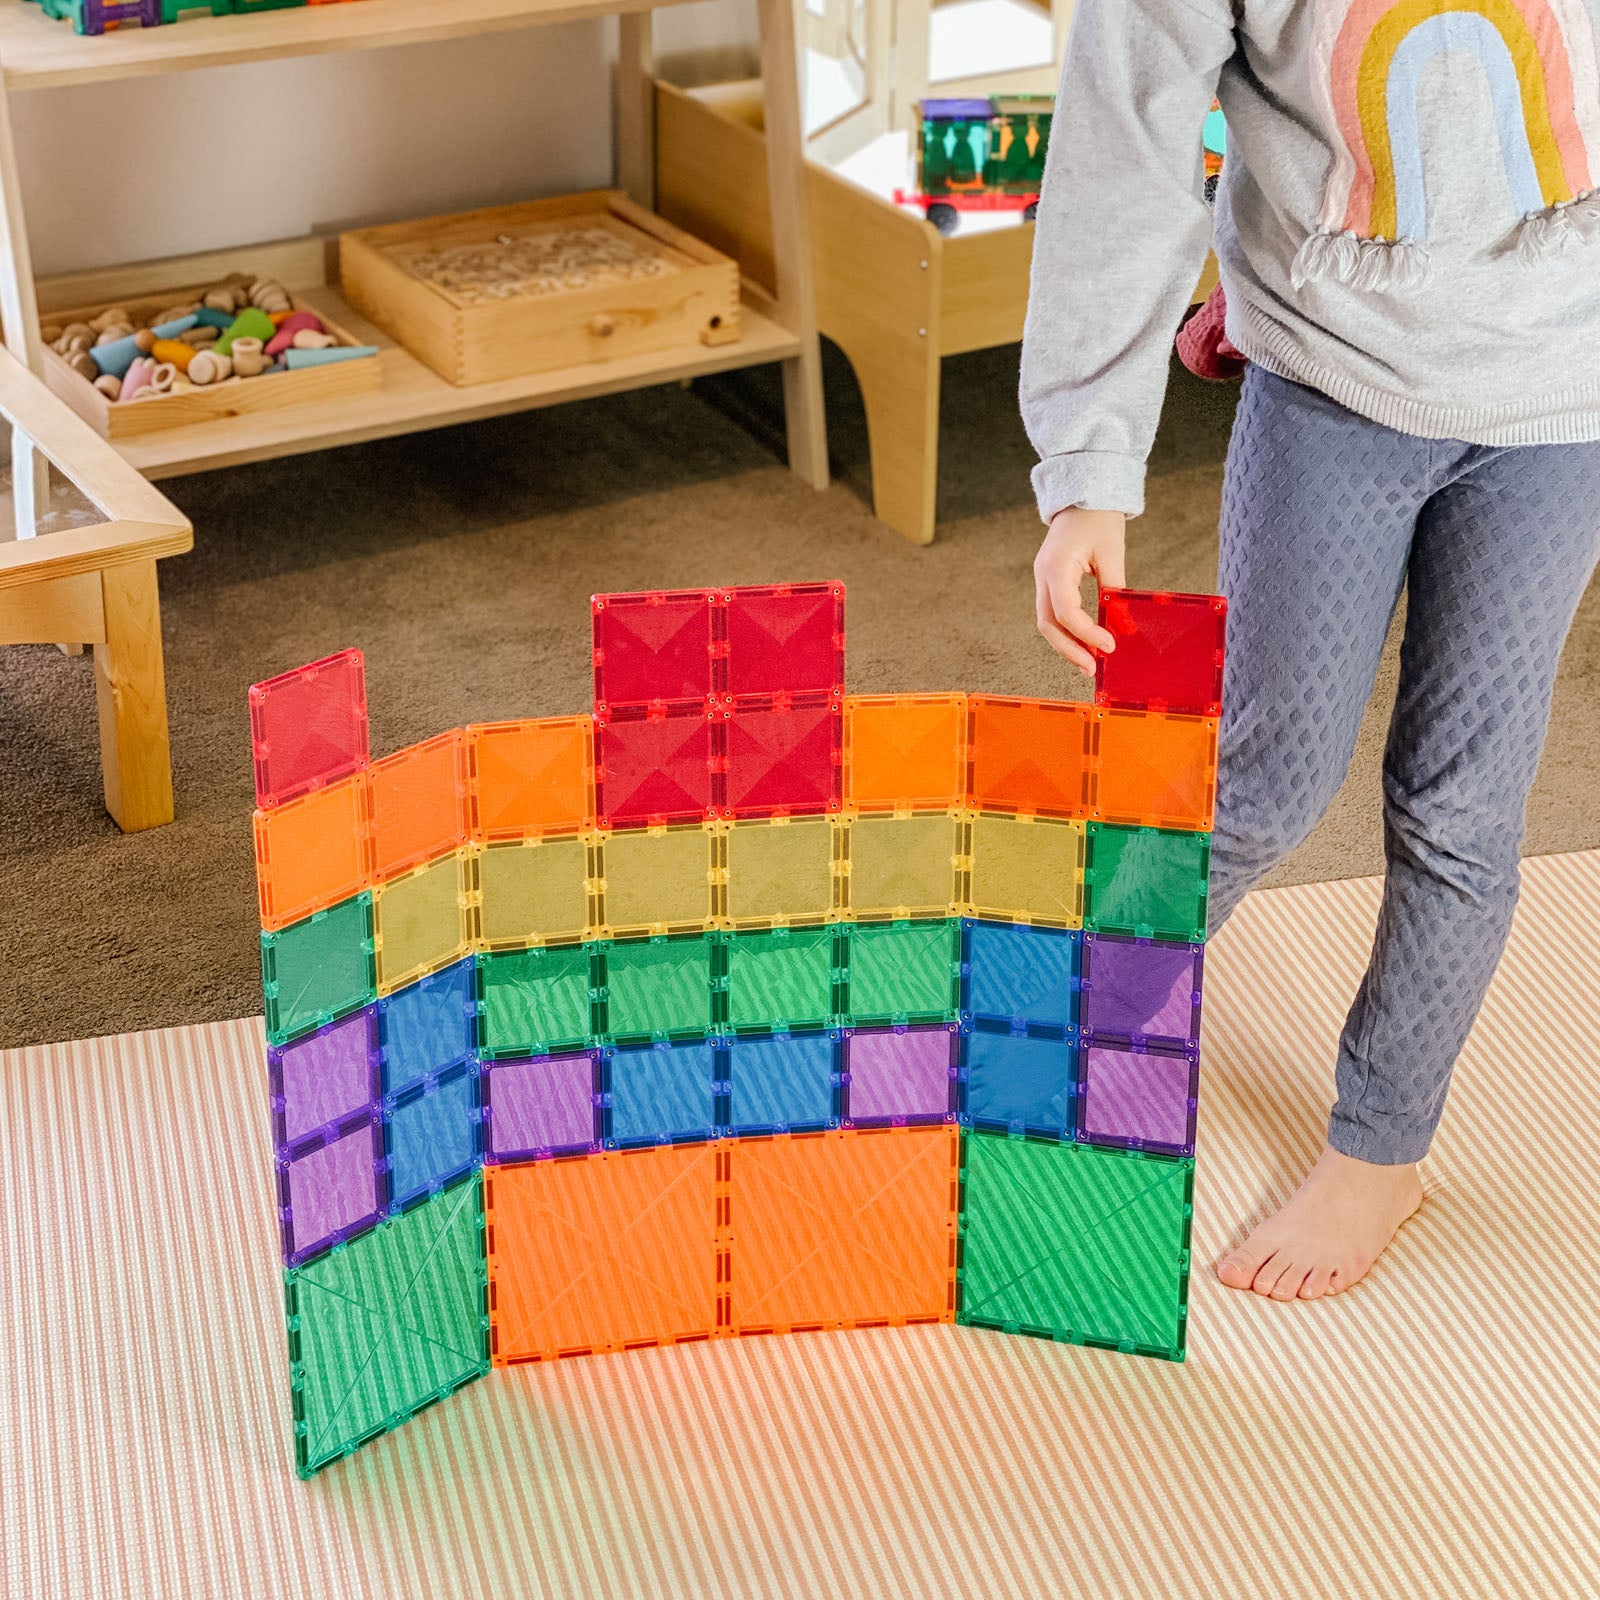 Magnetic Tiles Rainbow Square Pack - 42 Pieces